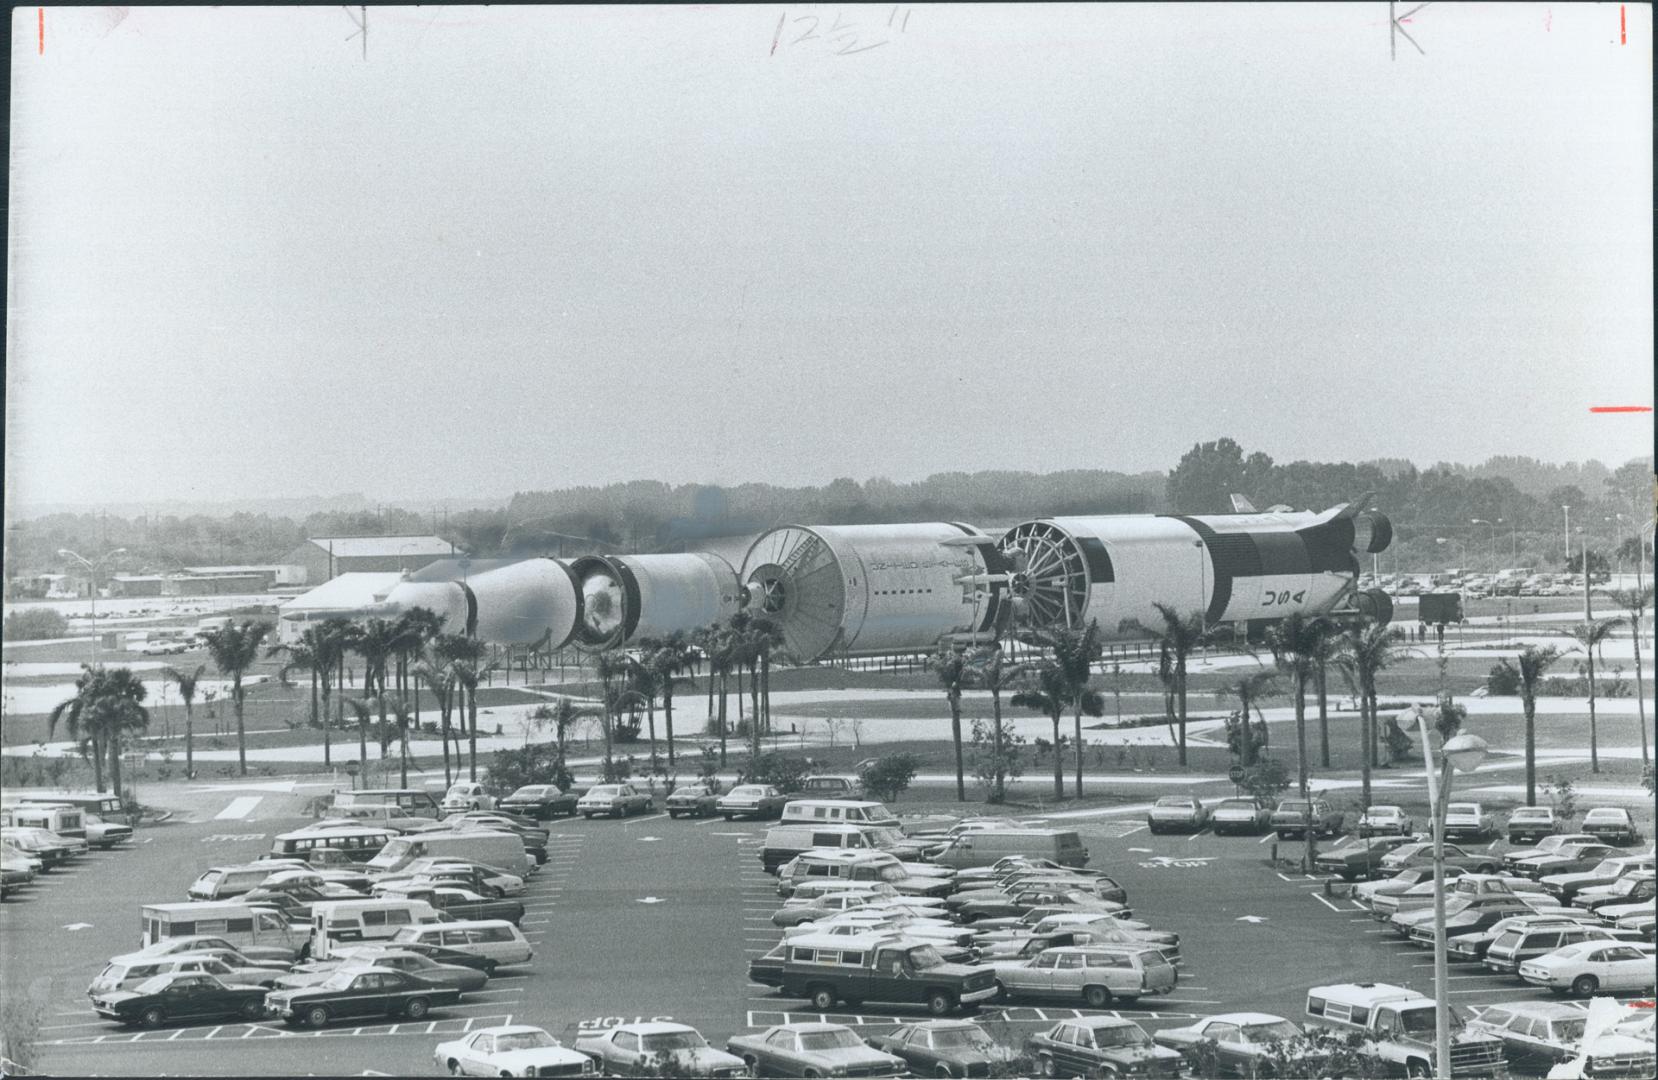 At Kennedy Space Centre the gigantic 180-million-horsepower, 363-foot Apollo/Saturn V rocket dwarfs not only the cars but the parking lot itself